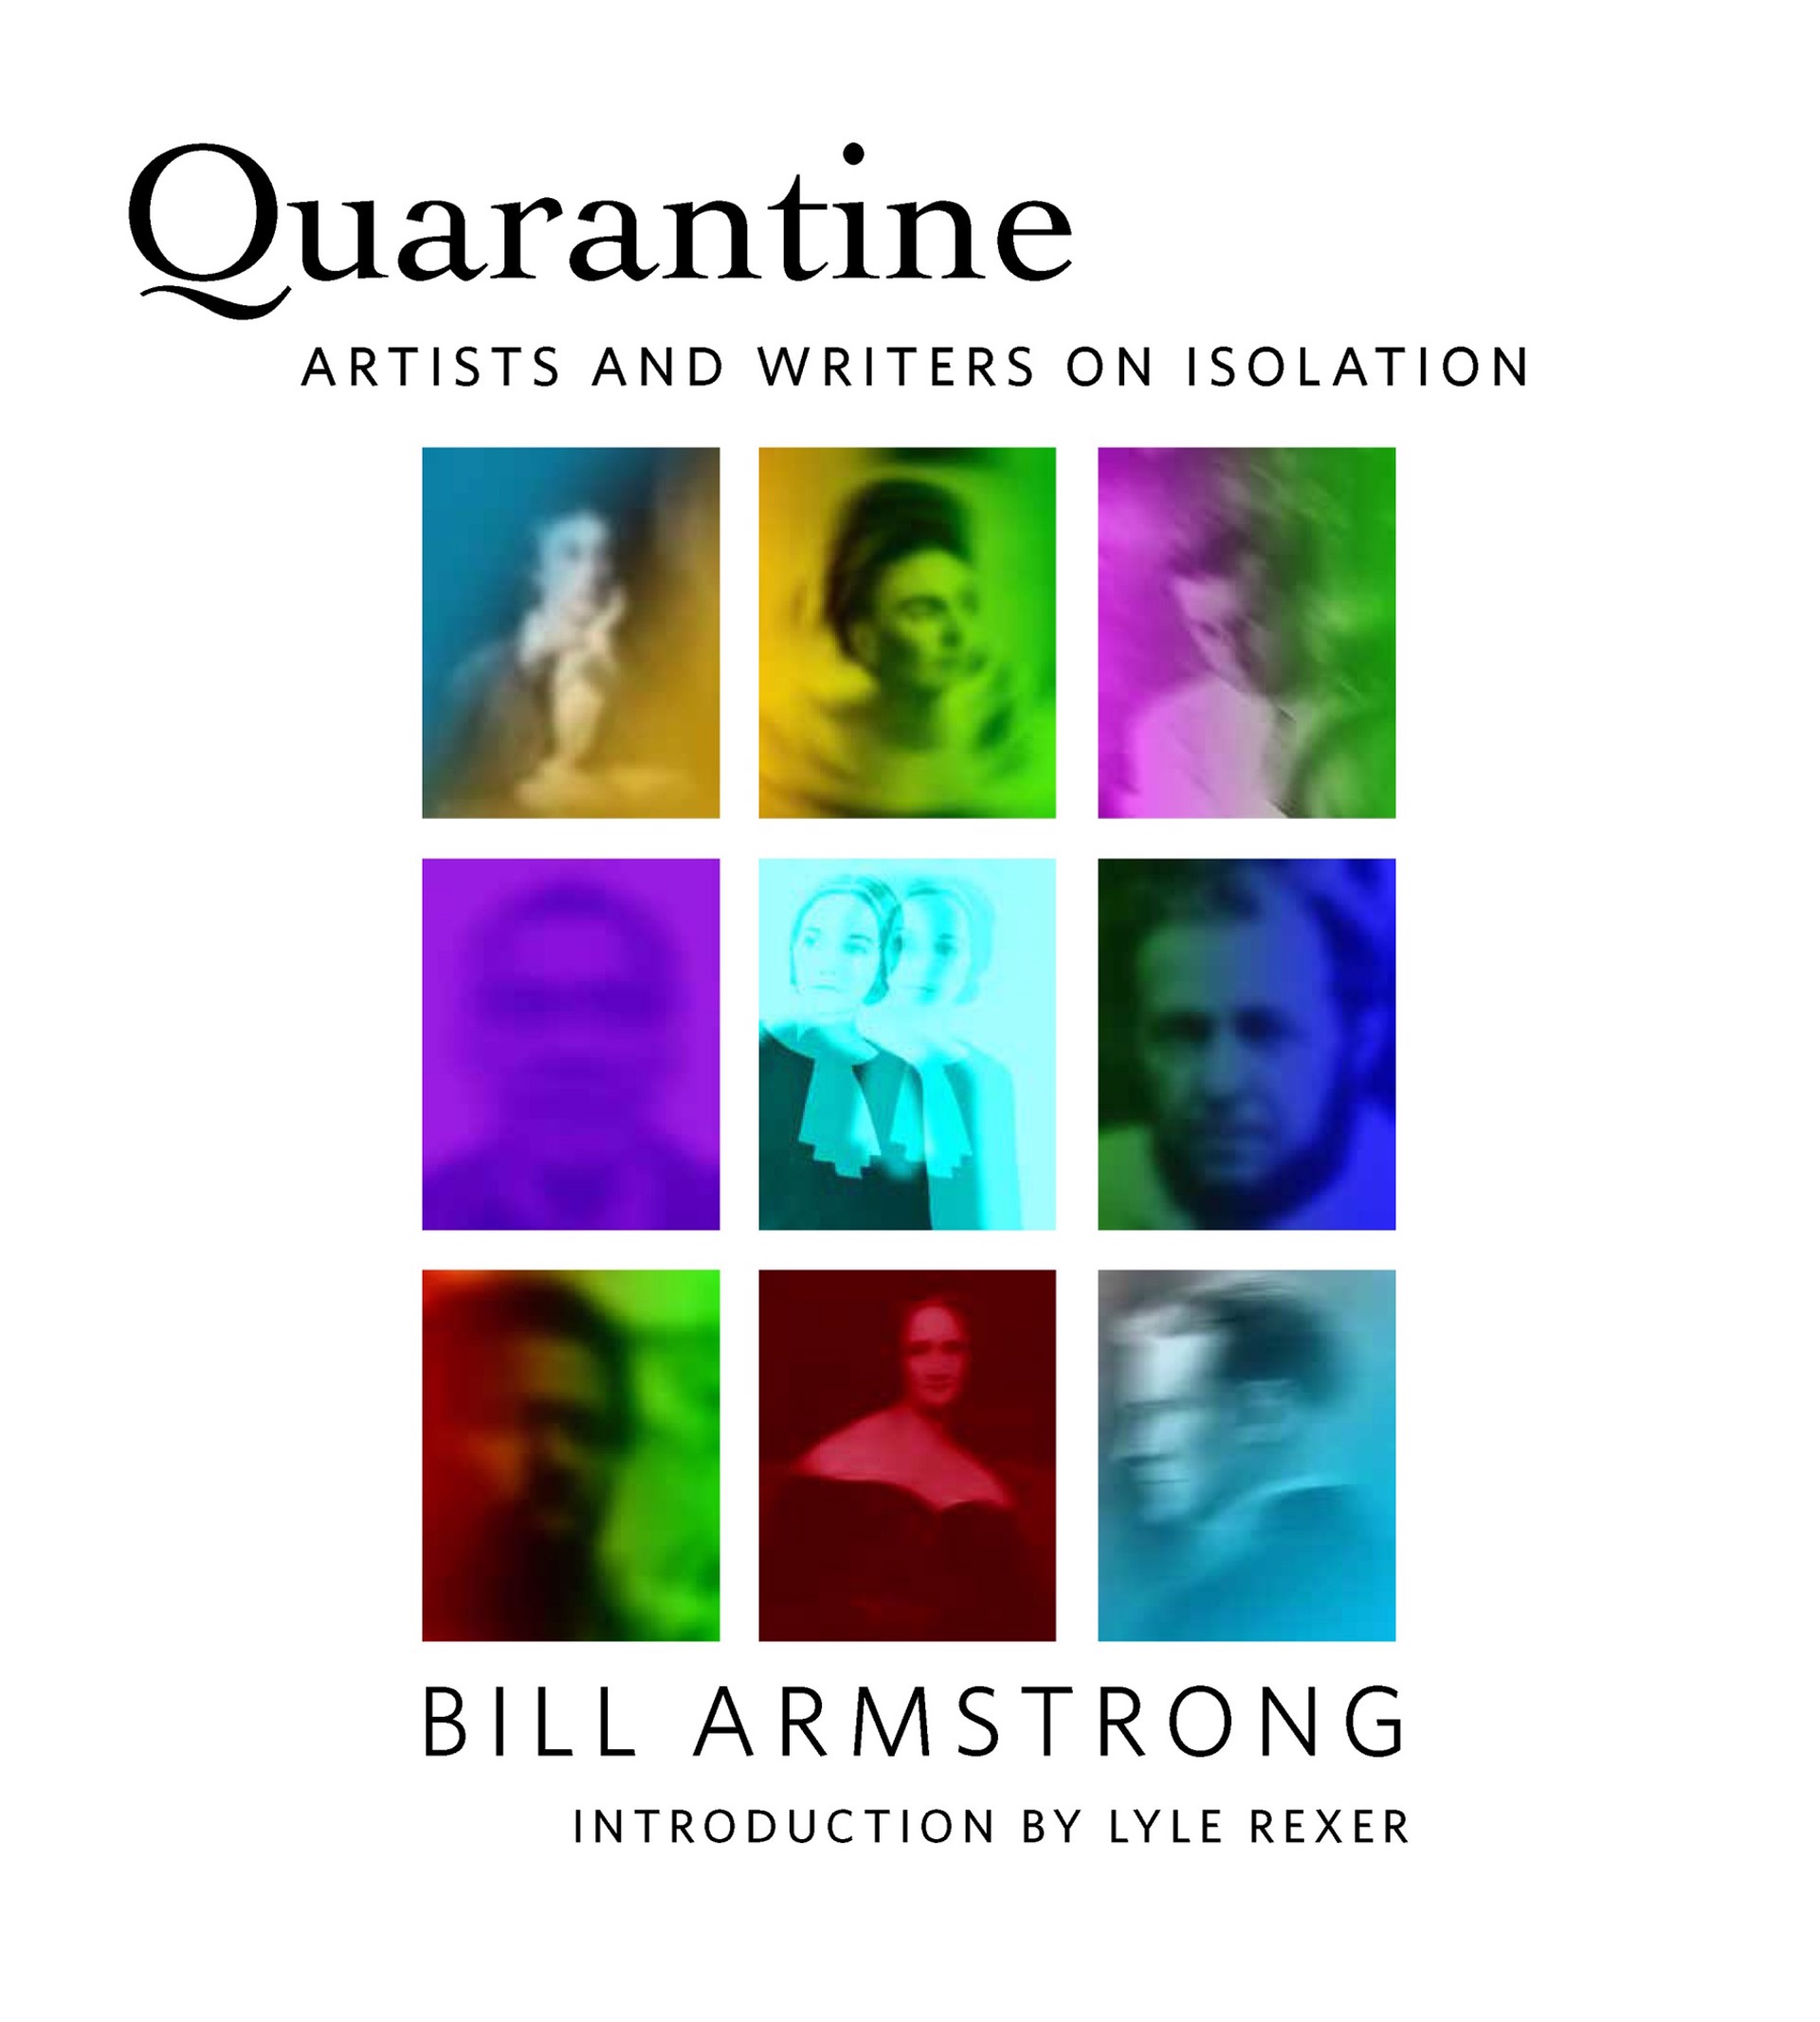 Quarantine: Artists and Writers on Isolation by Bill Armstrong